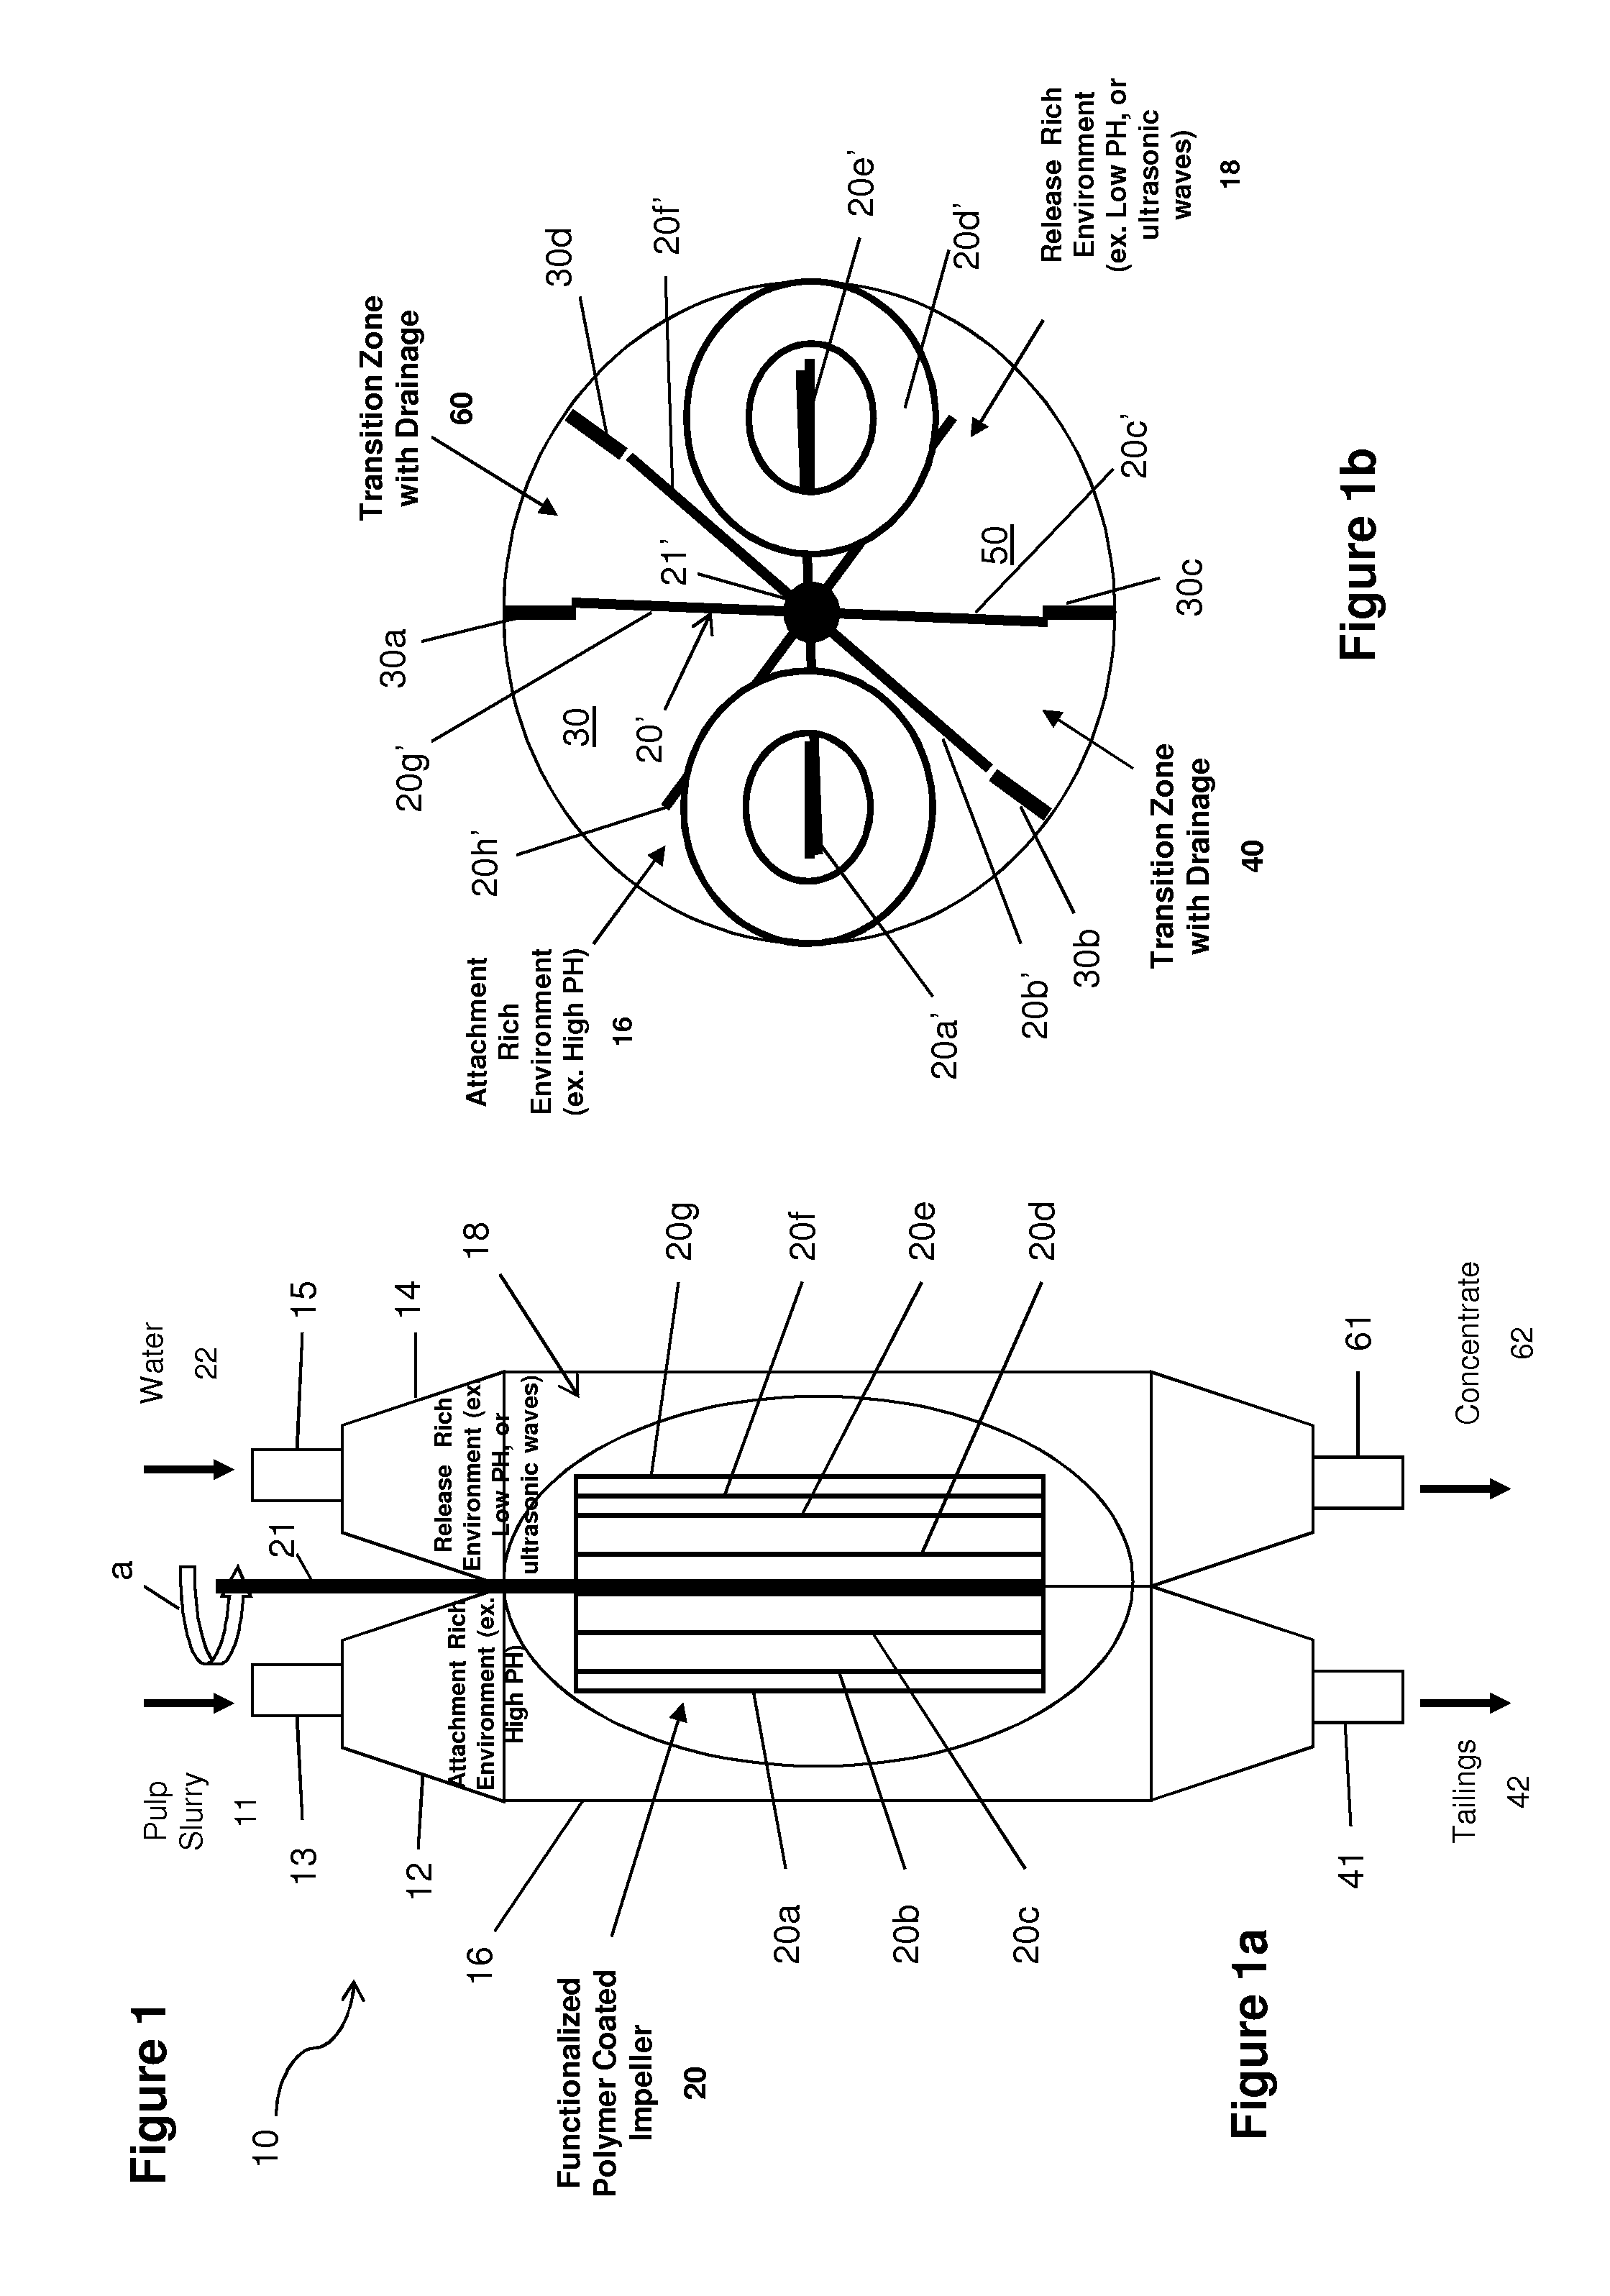 Mineral separation using functionalized membranes